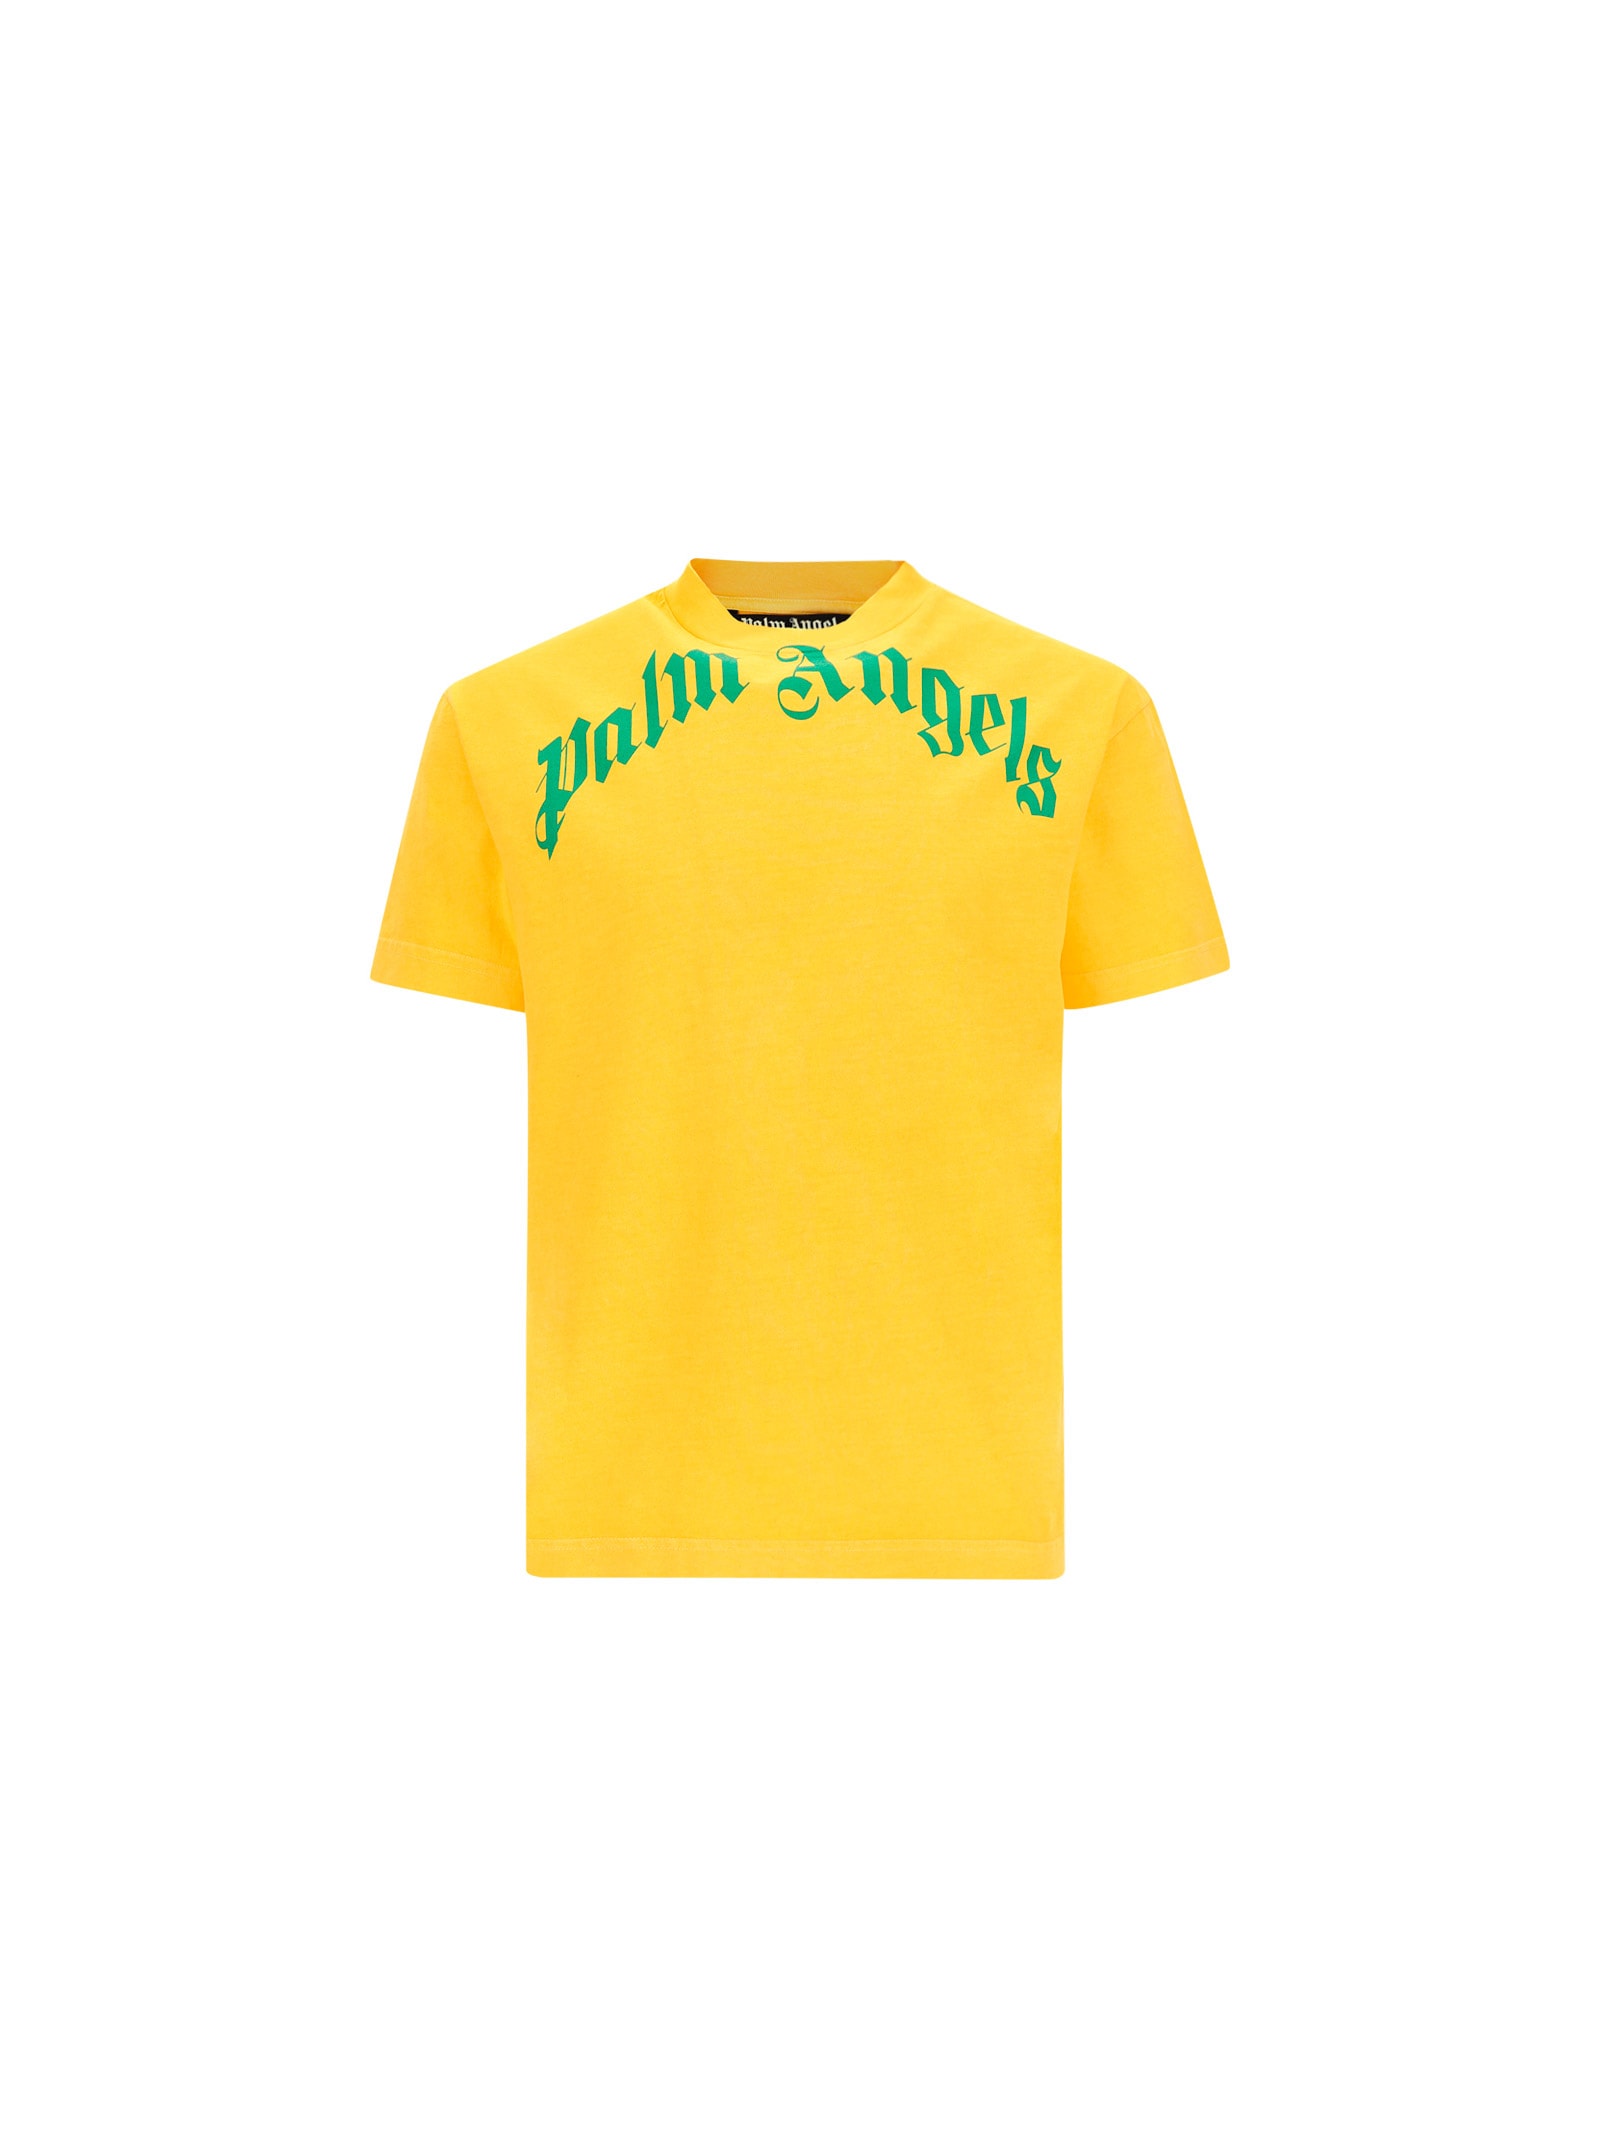 PALM ANGELS T-SHIRT,PMAA001R21JER0081855 1855 YELLOW GREEN